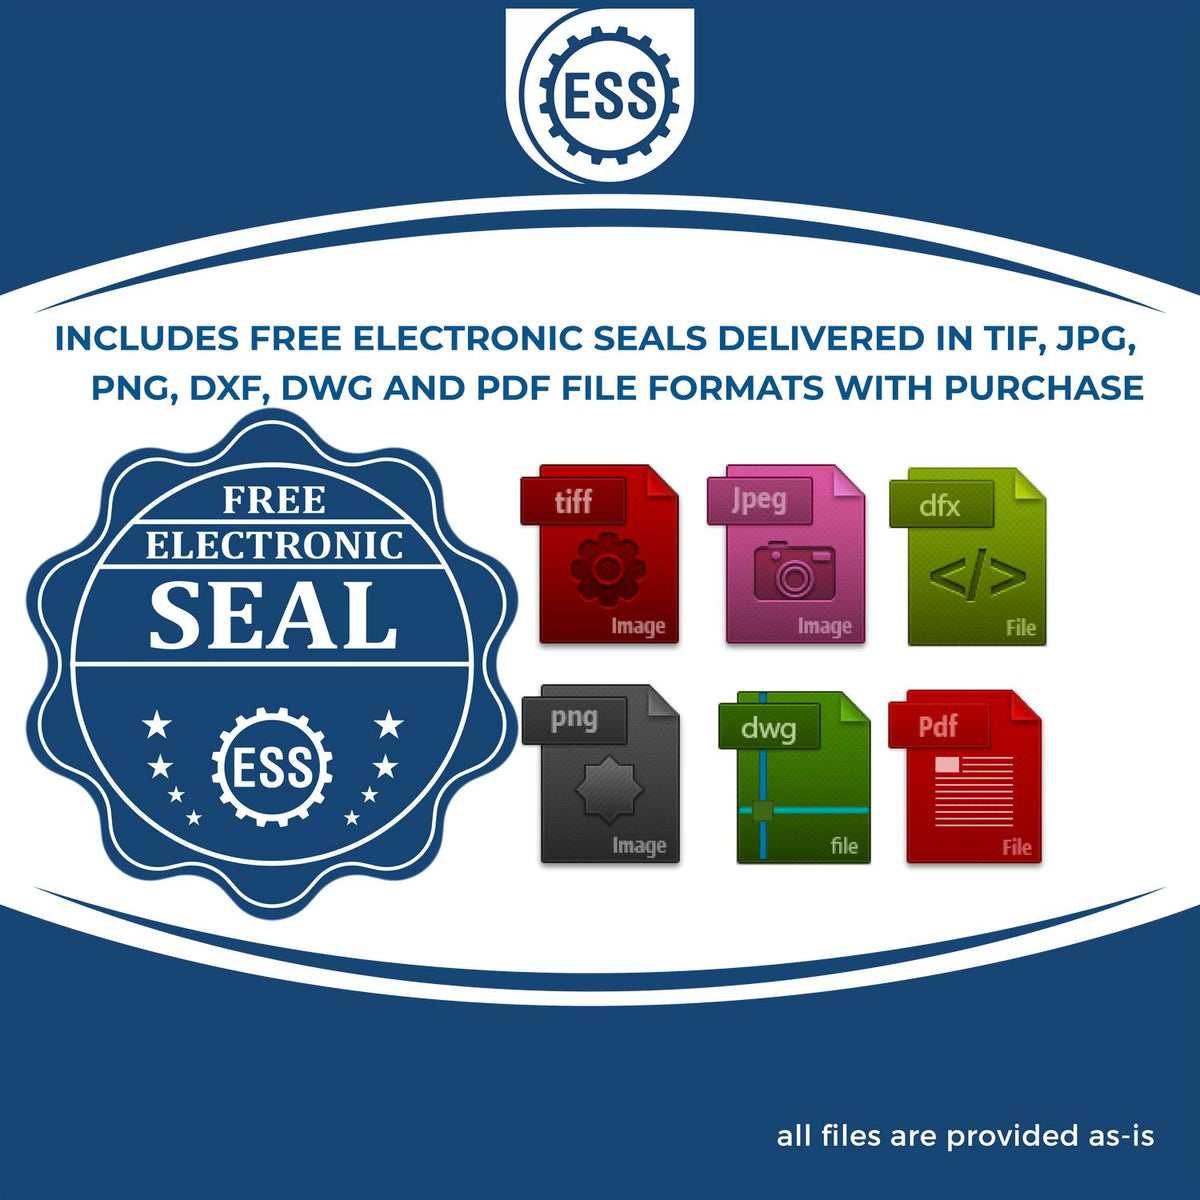 An infographic for the free electronic seal for the Slim Pre-Inked Texas Professional Engineer Seal Stamp illustrating the different file type icons such as DXF, DWG, TIF, JPG and PNG.